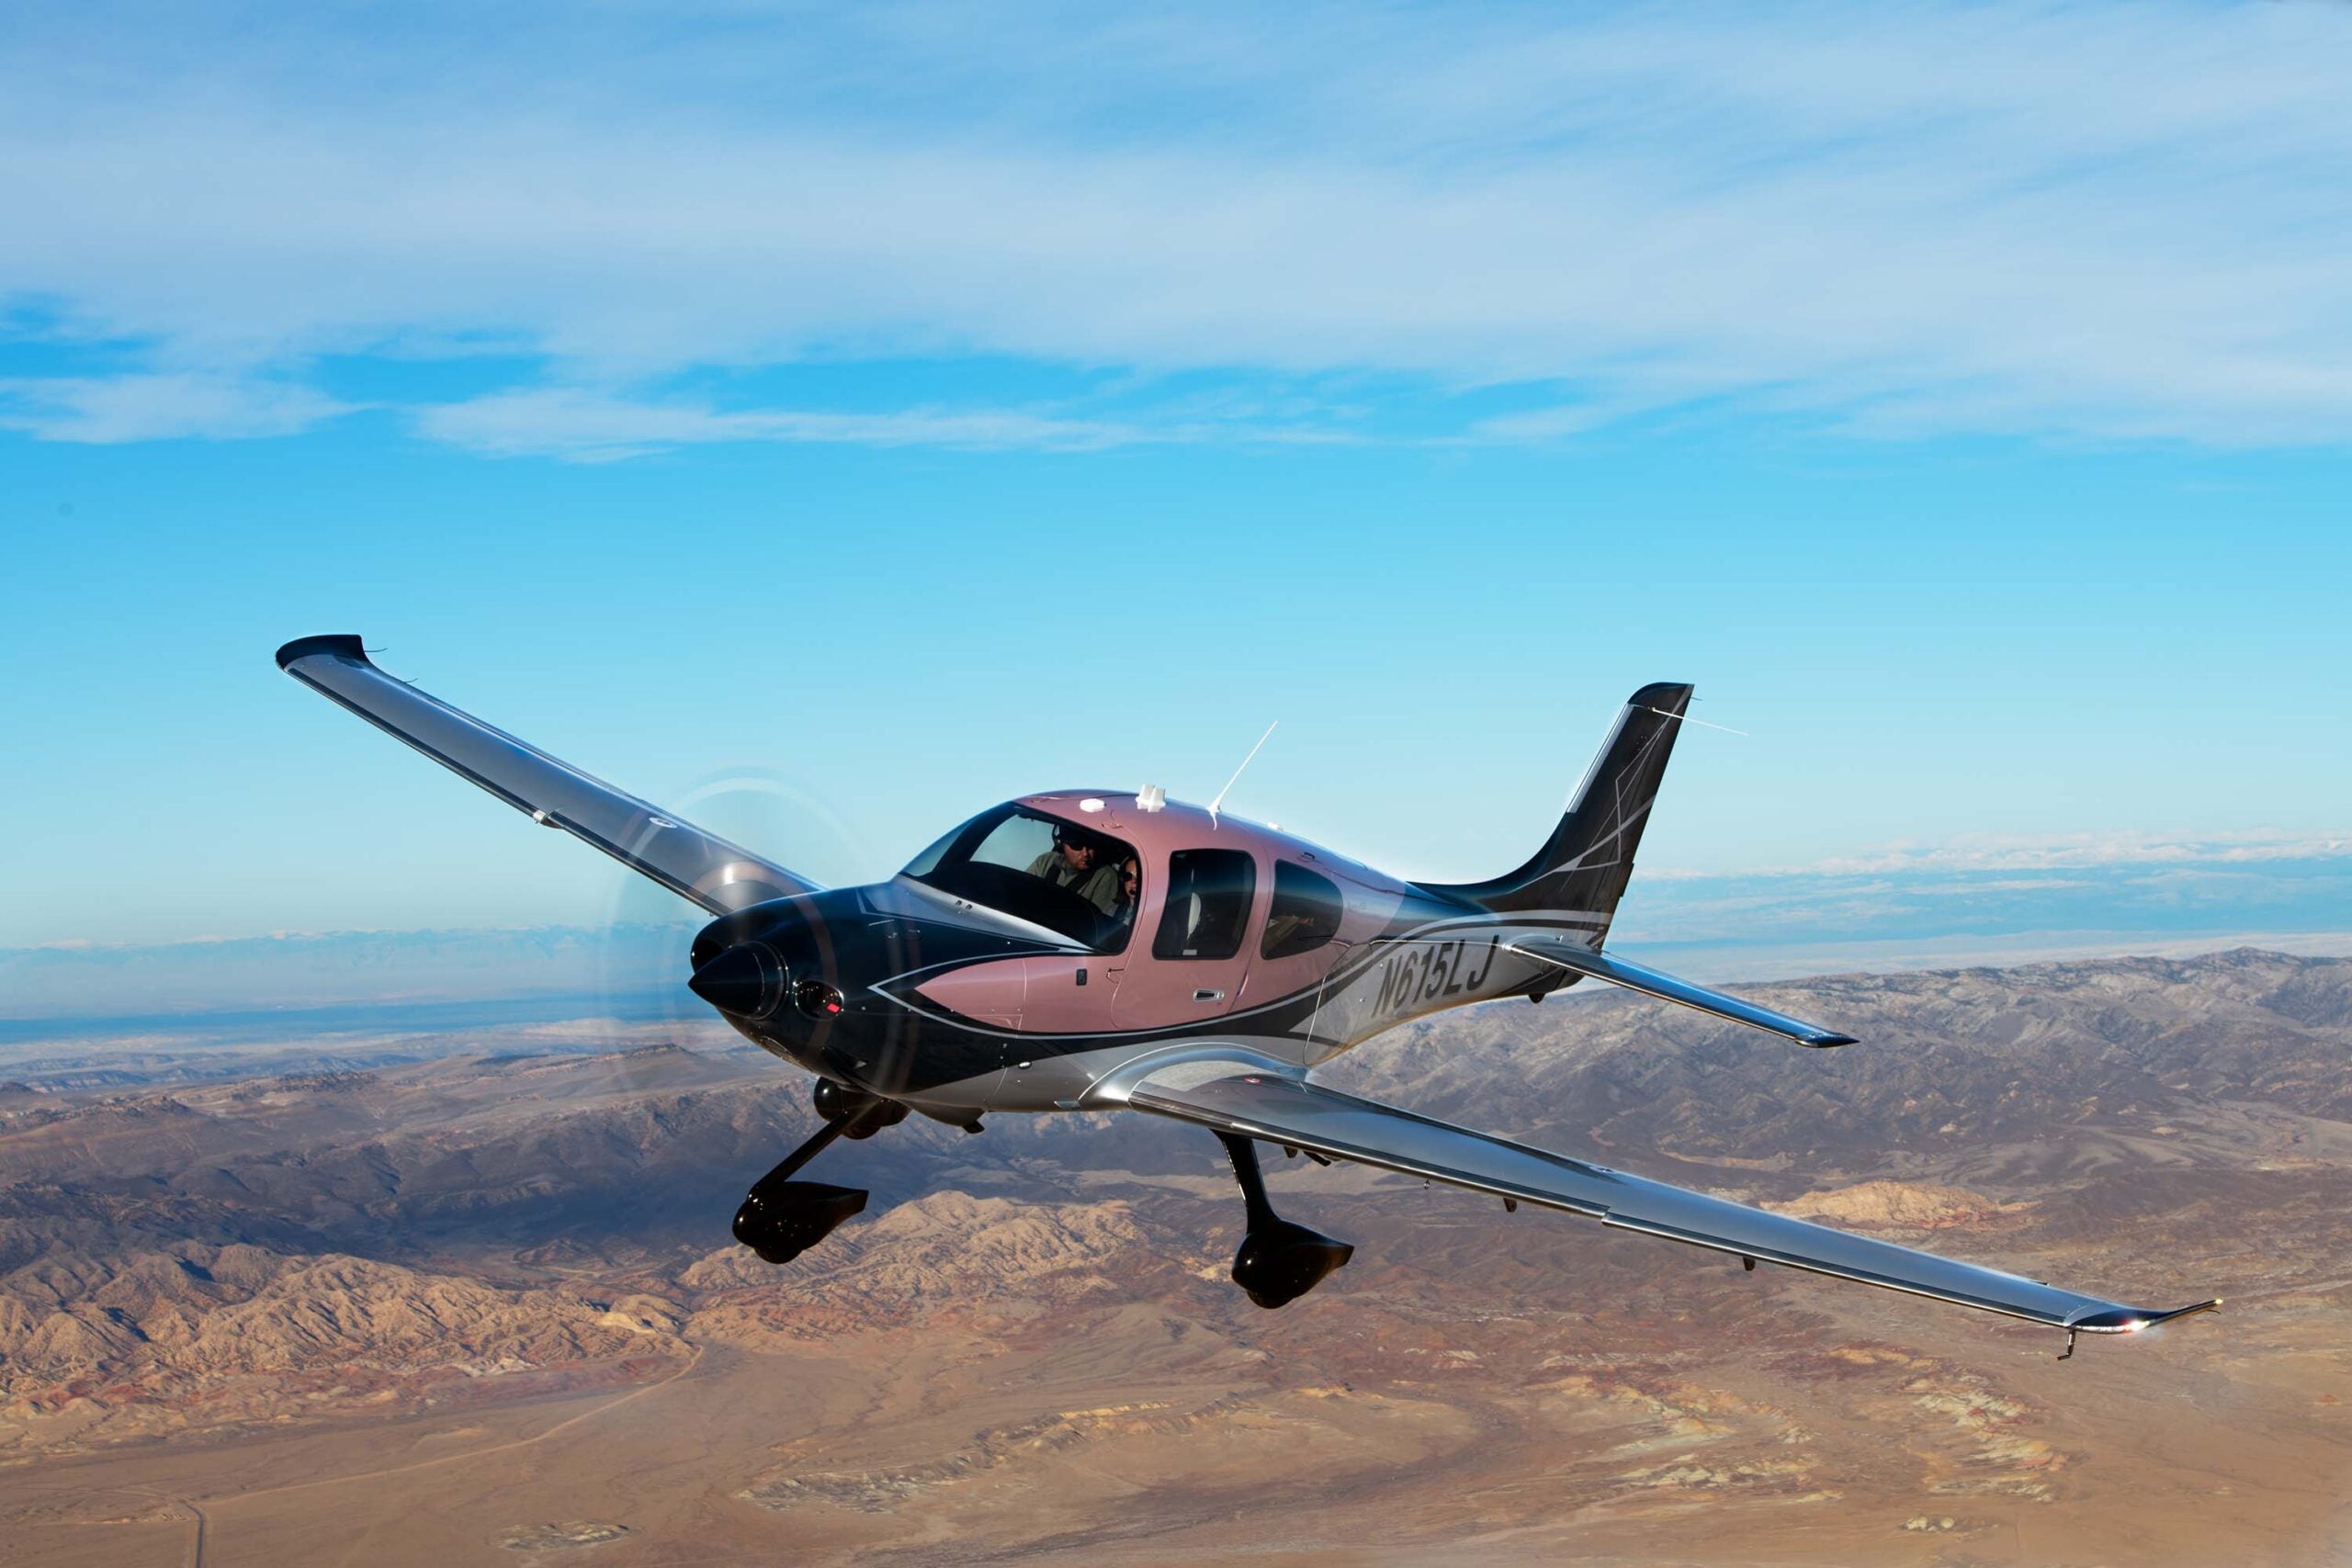 UPDATE: Continental Engine Issue Drives Grounding of Cirrus SR22s, Other Aircraft